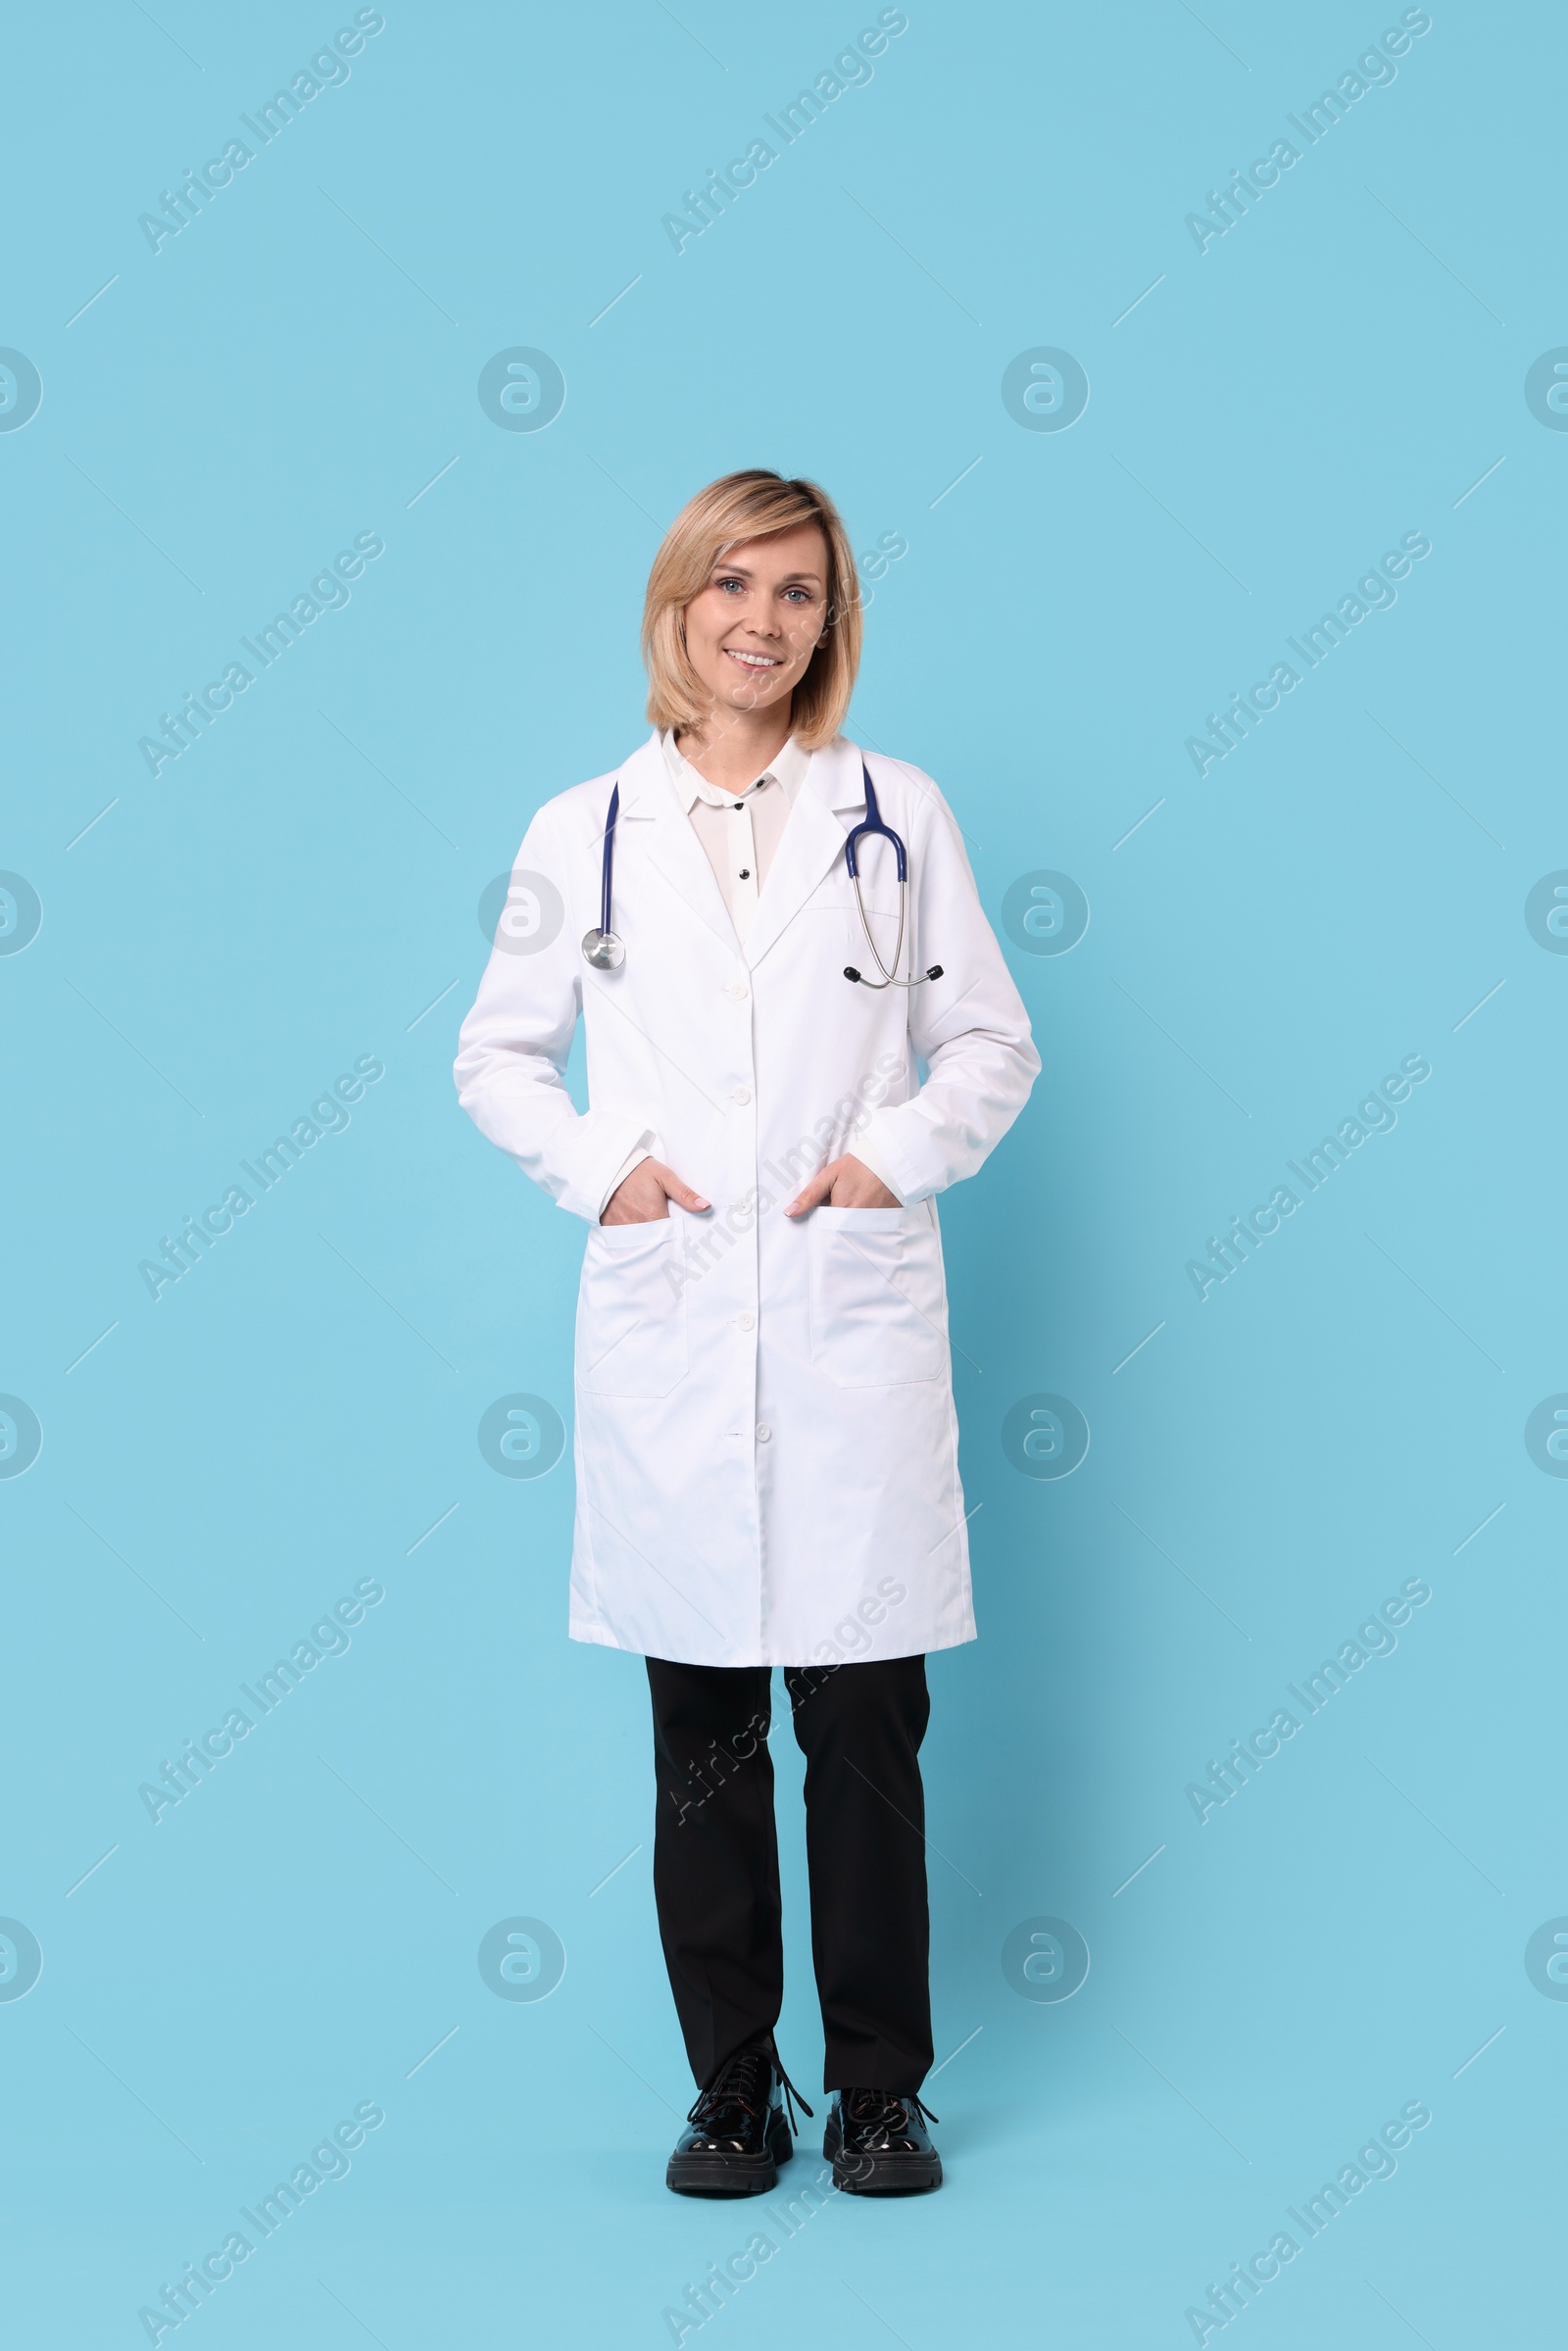 Photo of Smiling doctor in uniform on light blue background